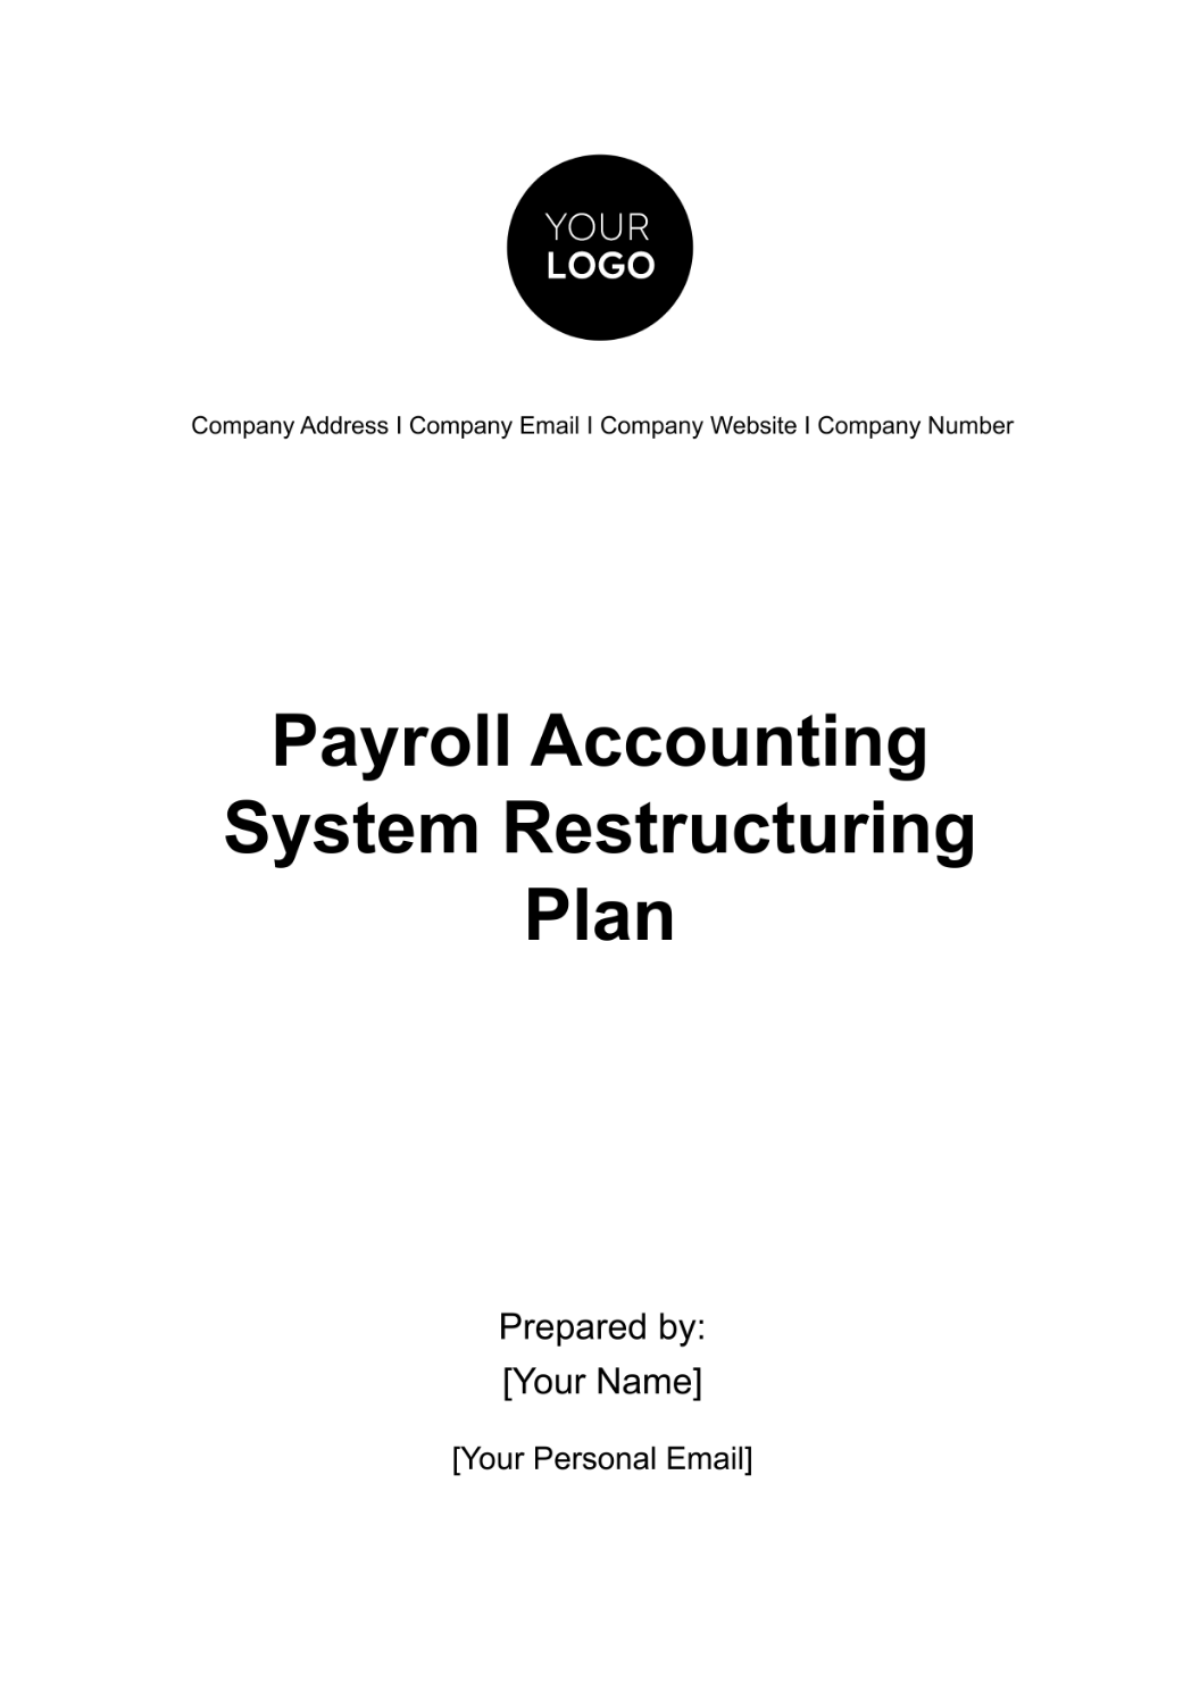 Free Payroll Accounting System Restructuring Plan Template